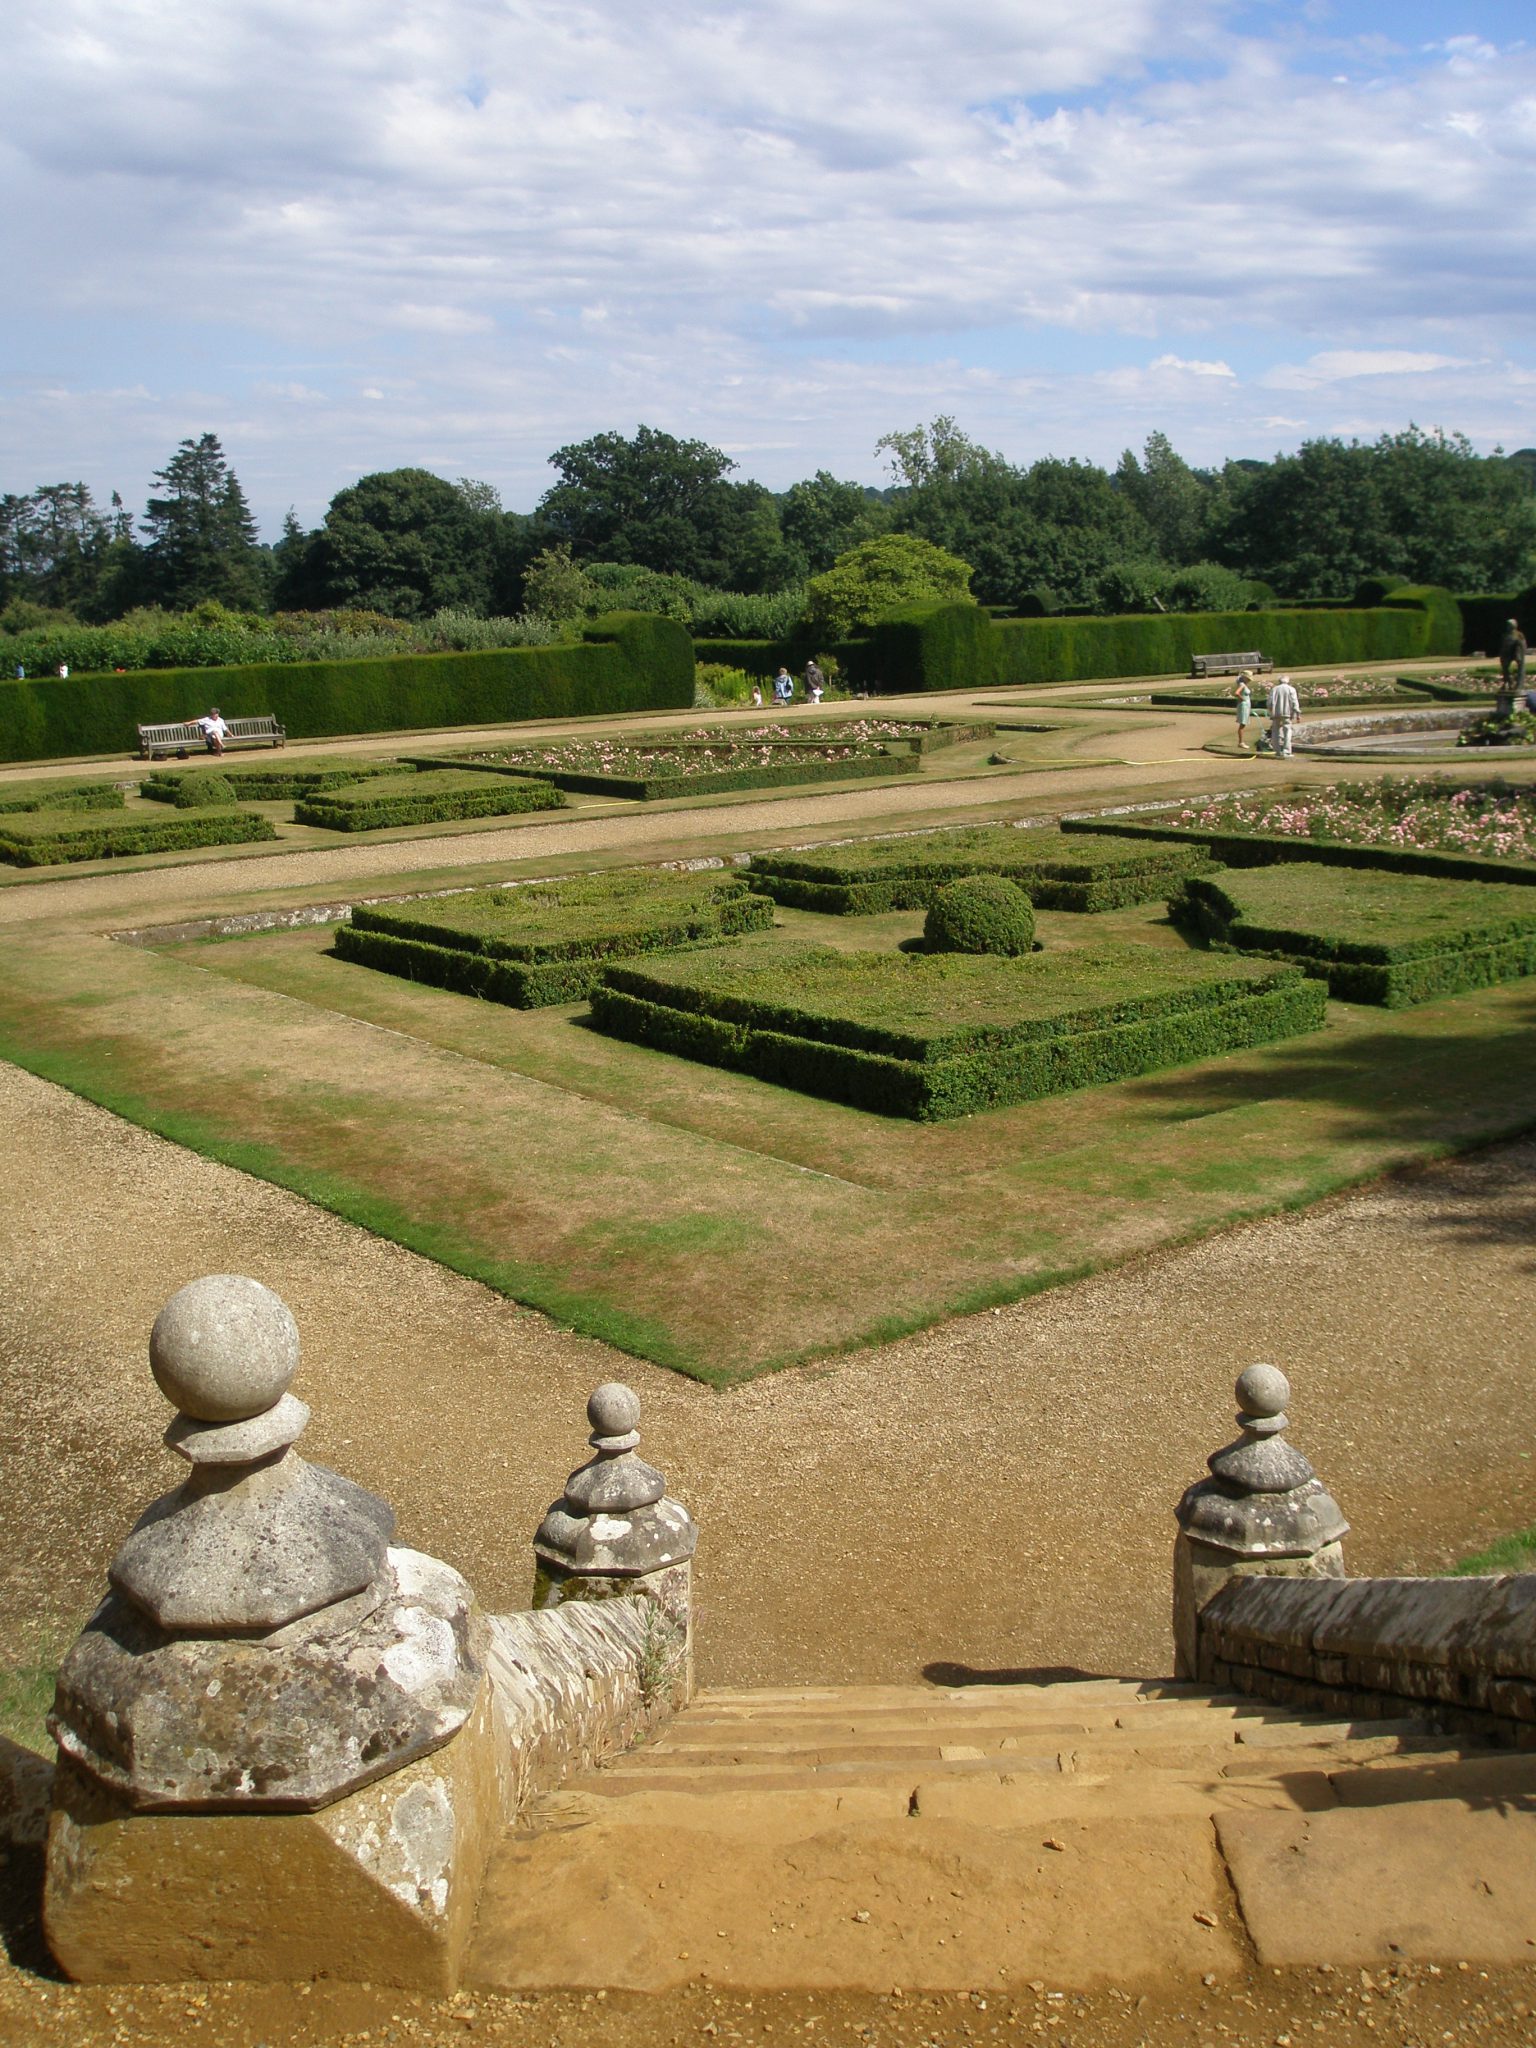 We climbed steps to the South Lawn, for a higher view of the Italian Garden. Water shortages were afflicting Kent in August, as the parched lawns indicate.